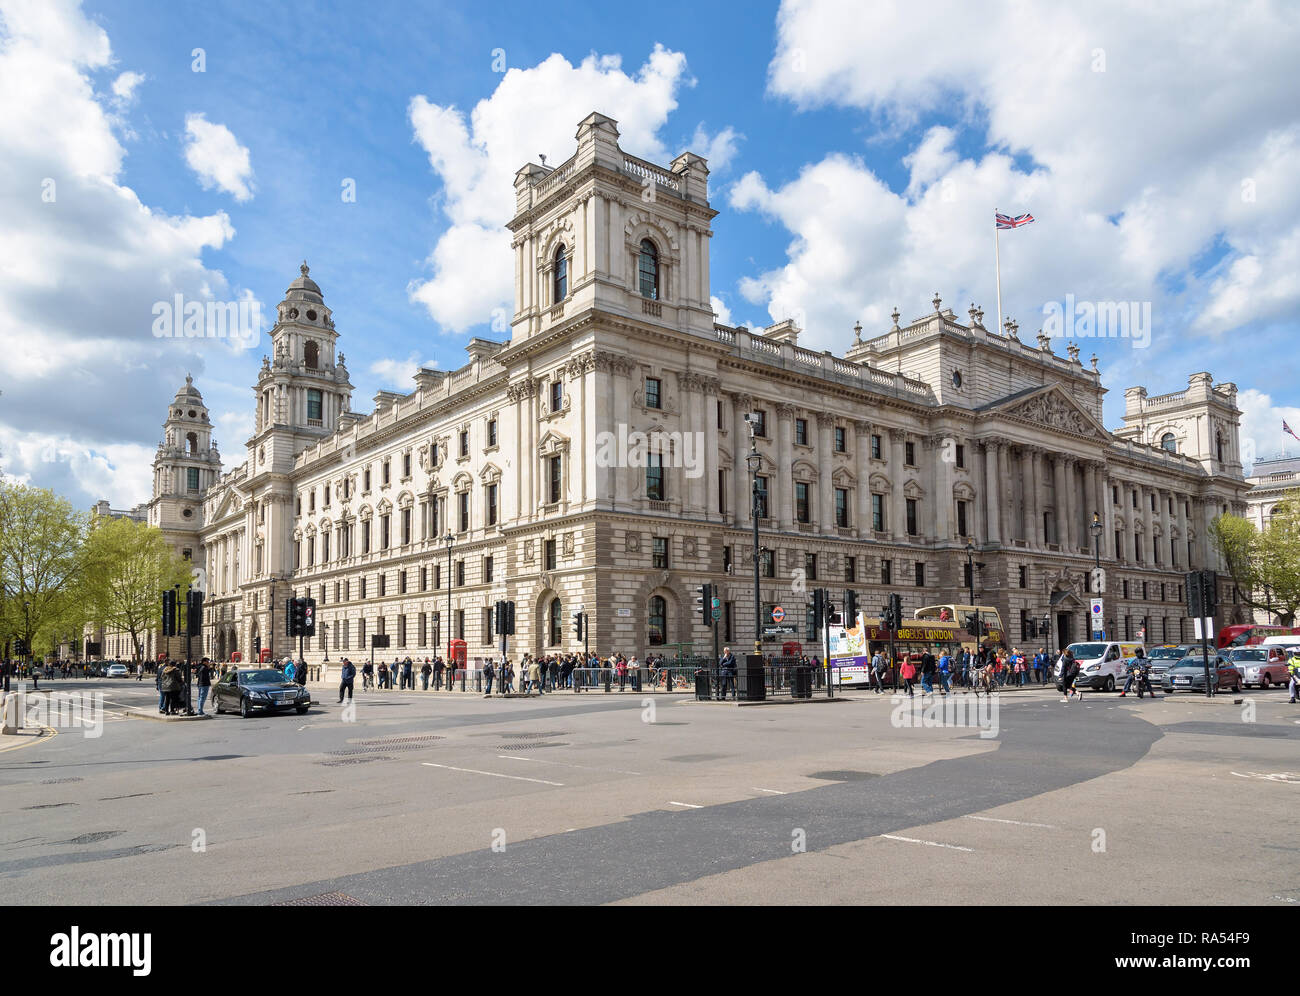 London, UK - Appril 28, 2018: View of busy intersection at Parliament Square Garden in the Westminster district Stock Photo